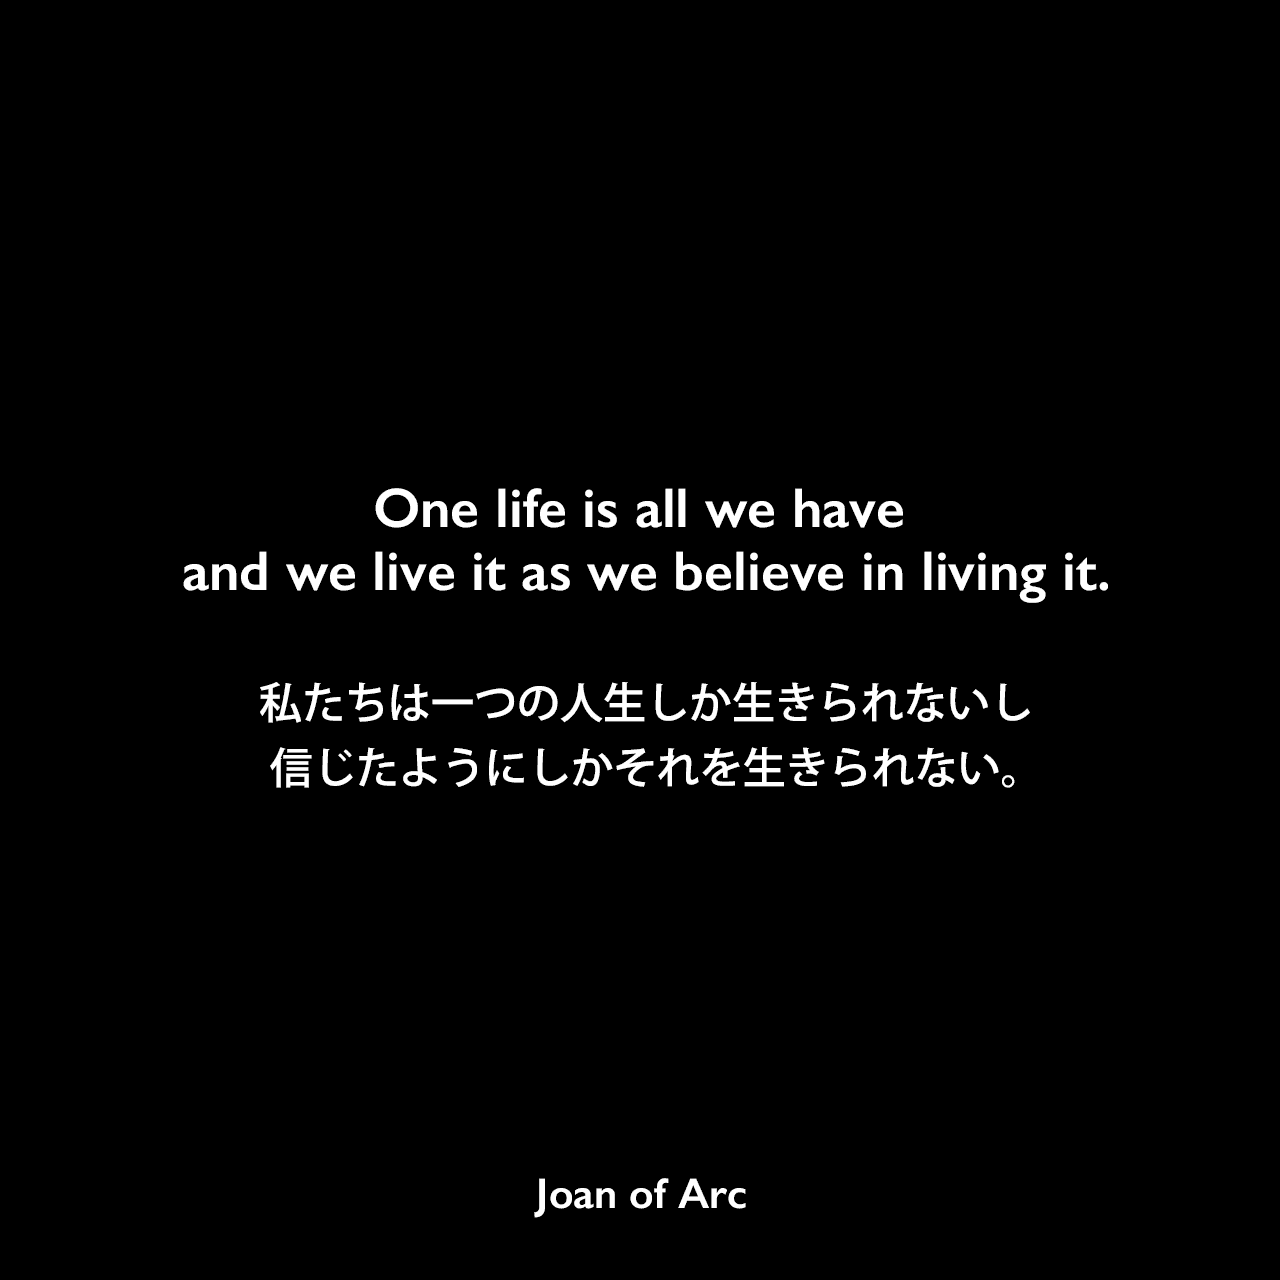 One life is all we have and we live it as we believe in living it.私たちは一つの人生しか生きられないし、信じたようにしかそれを生きられない。Joan of Arc